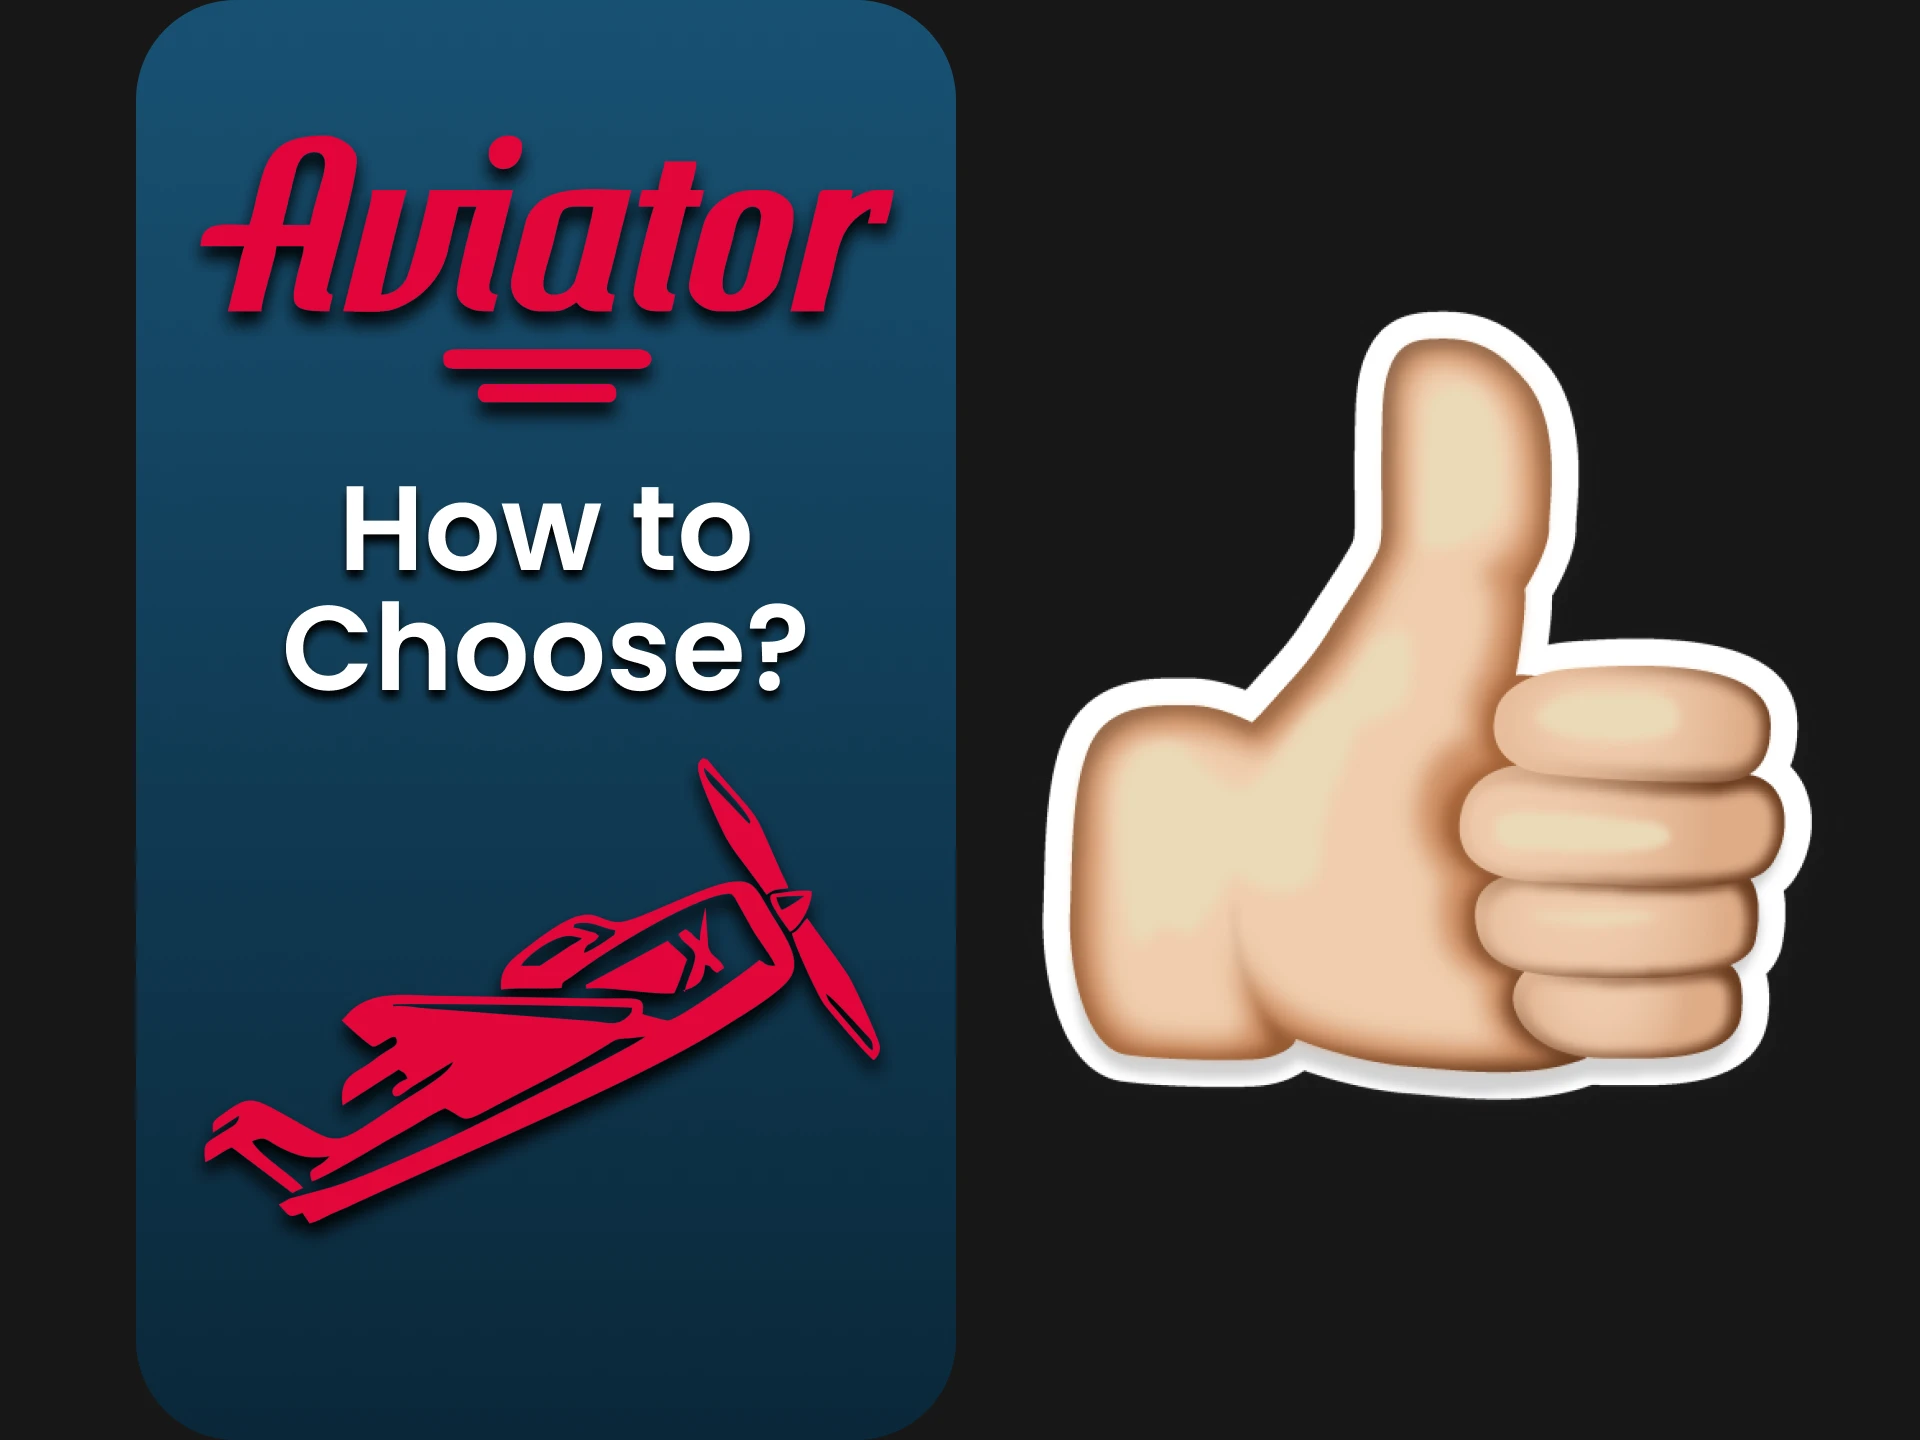 We'll show you how to choose the best Aviator app.